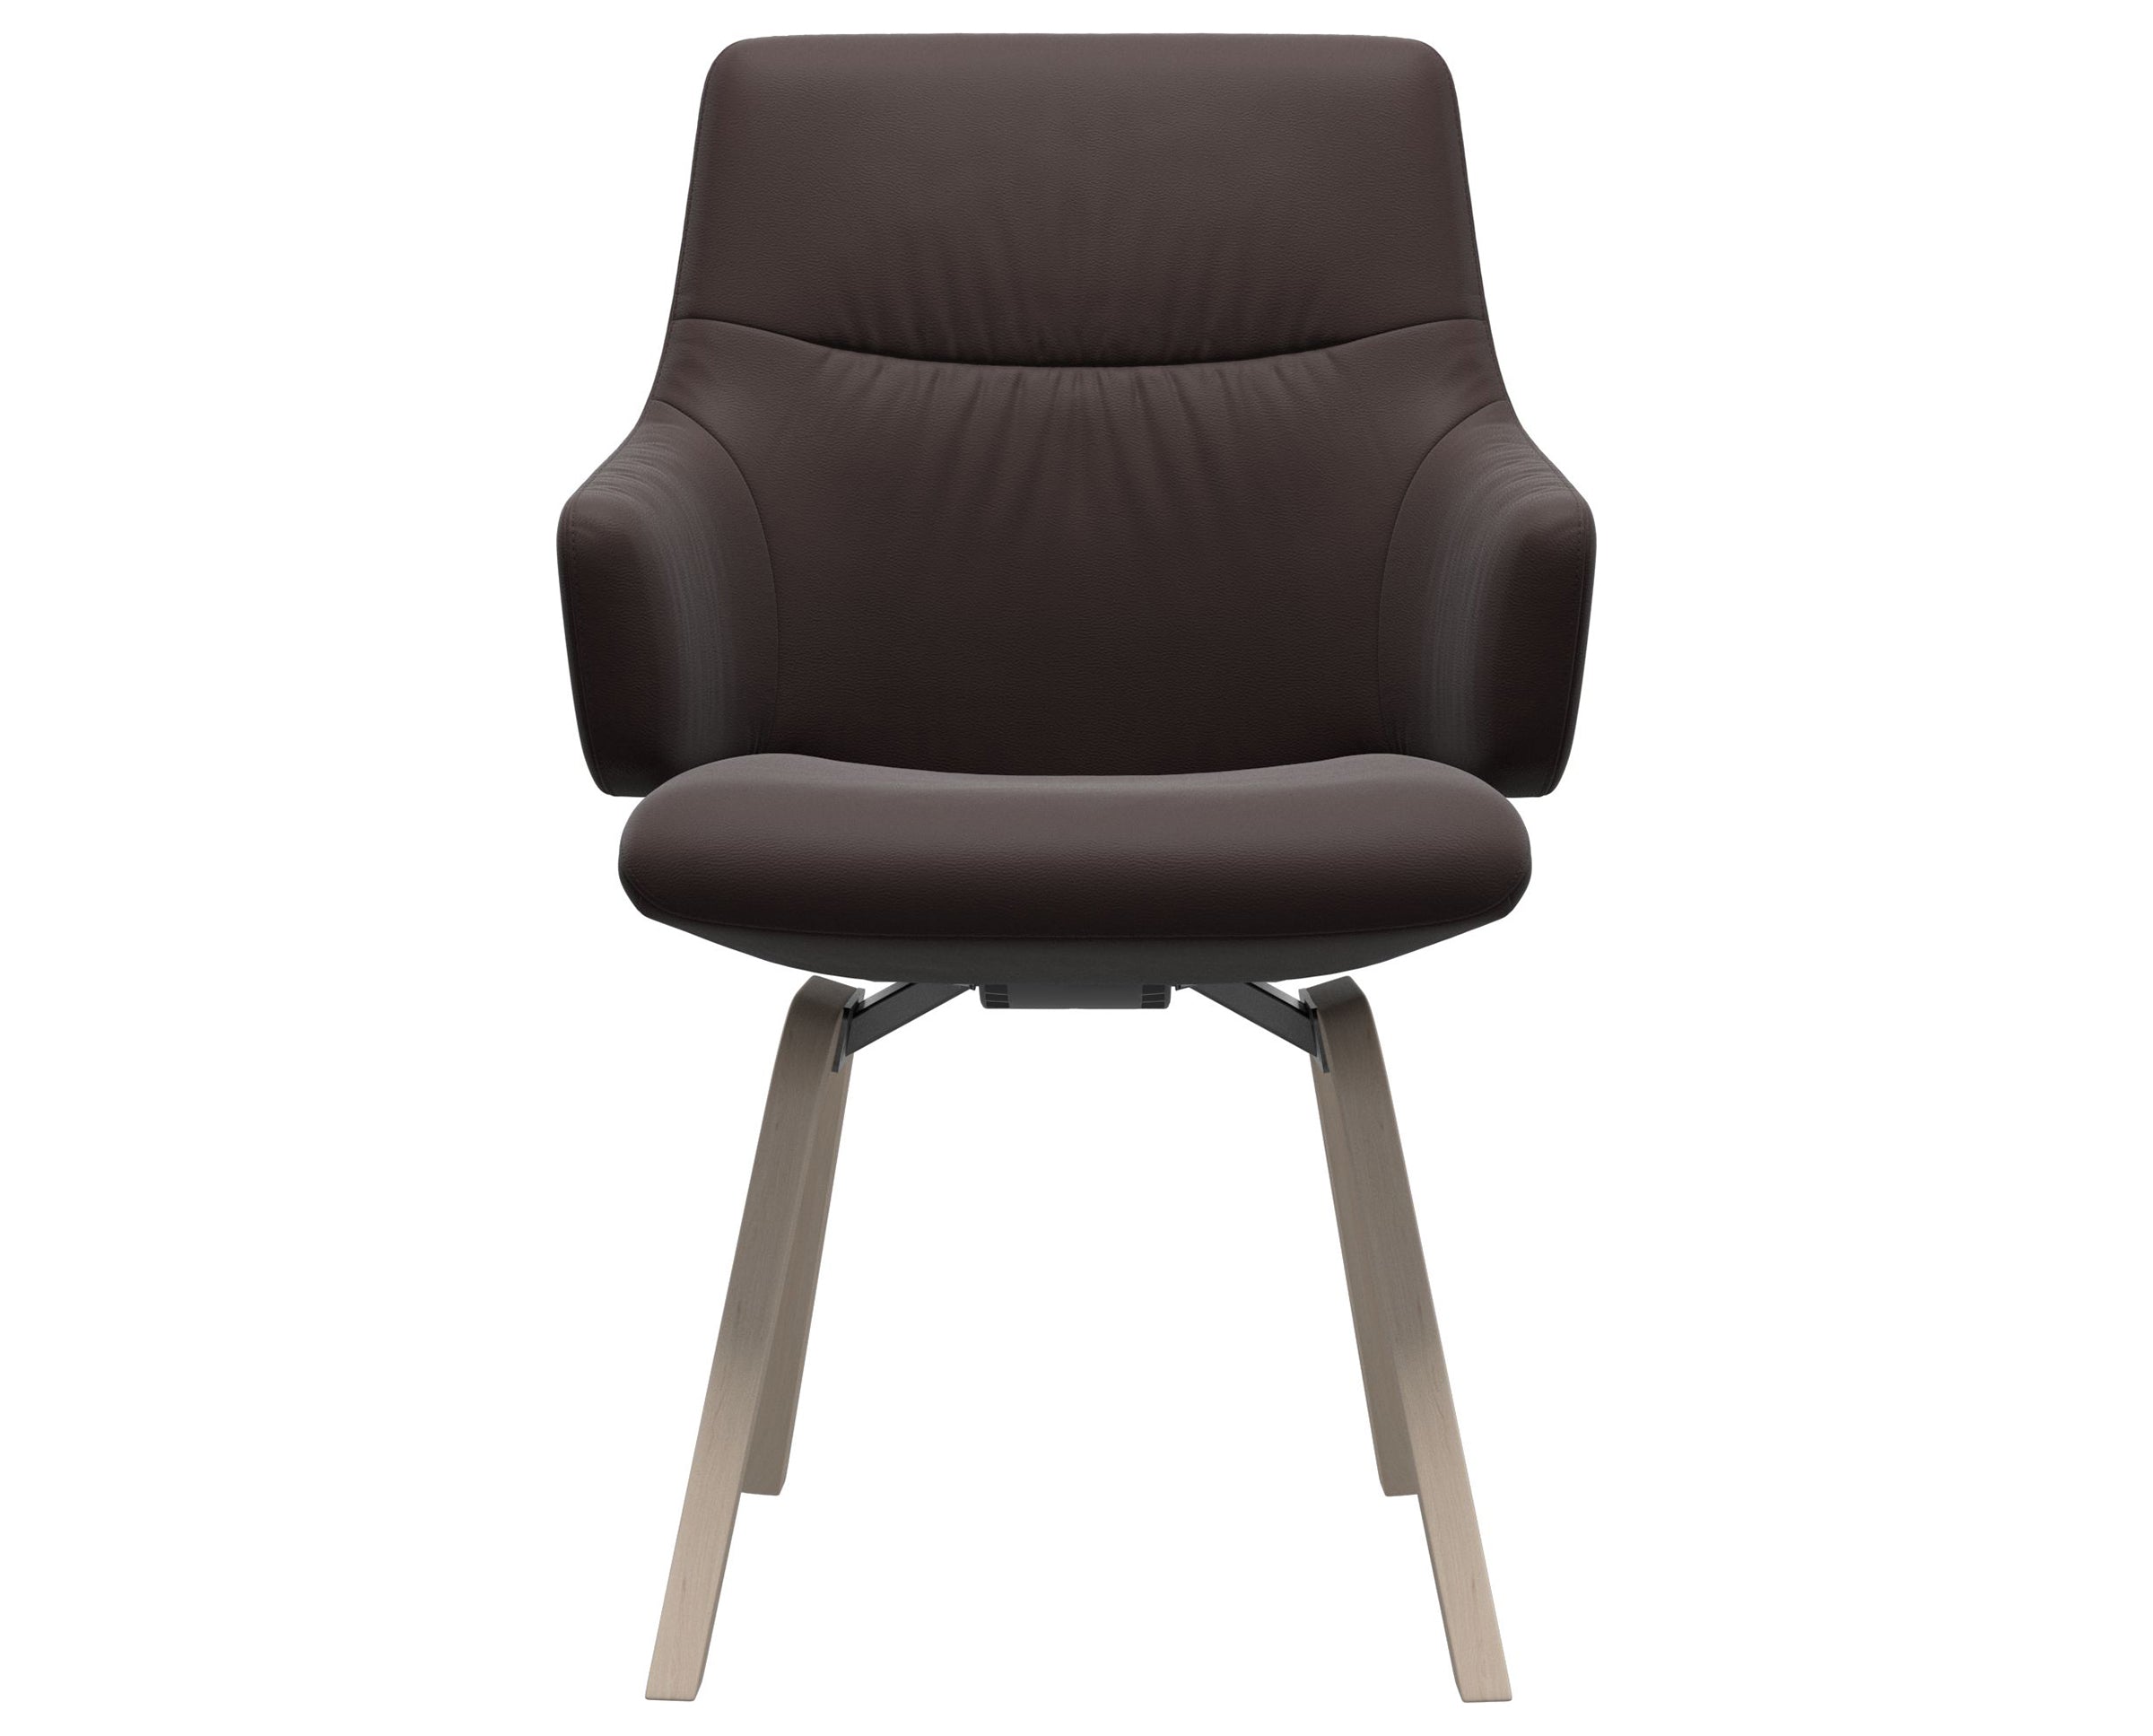 Paloma Leather Chocolate and Whitewash Base | Stressless Mint Low Back D200 Dining Chair w/Arms | Valley Ridge Furniture